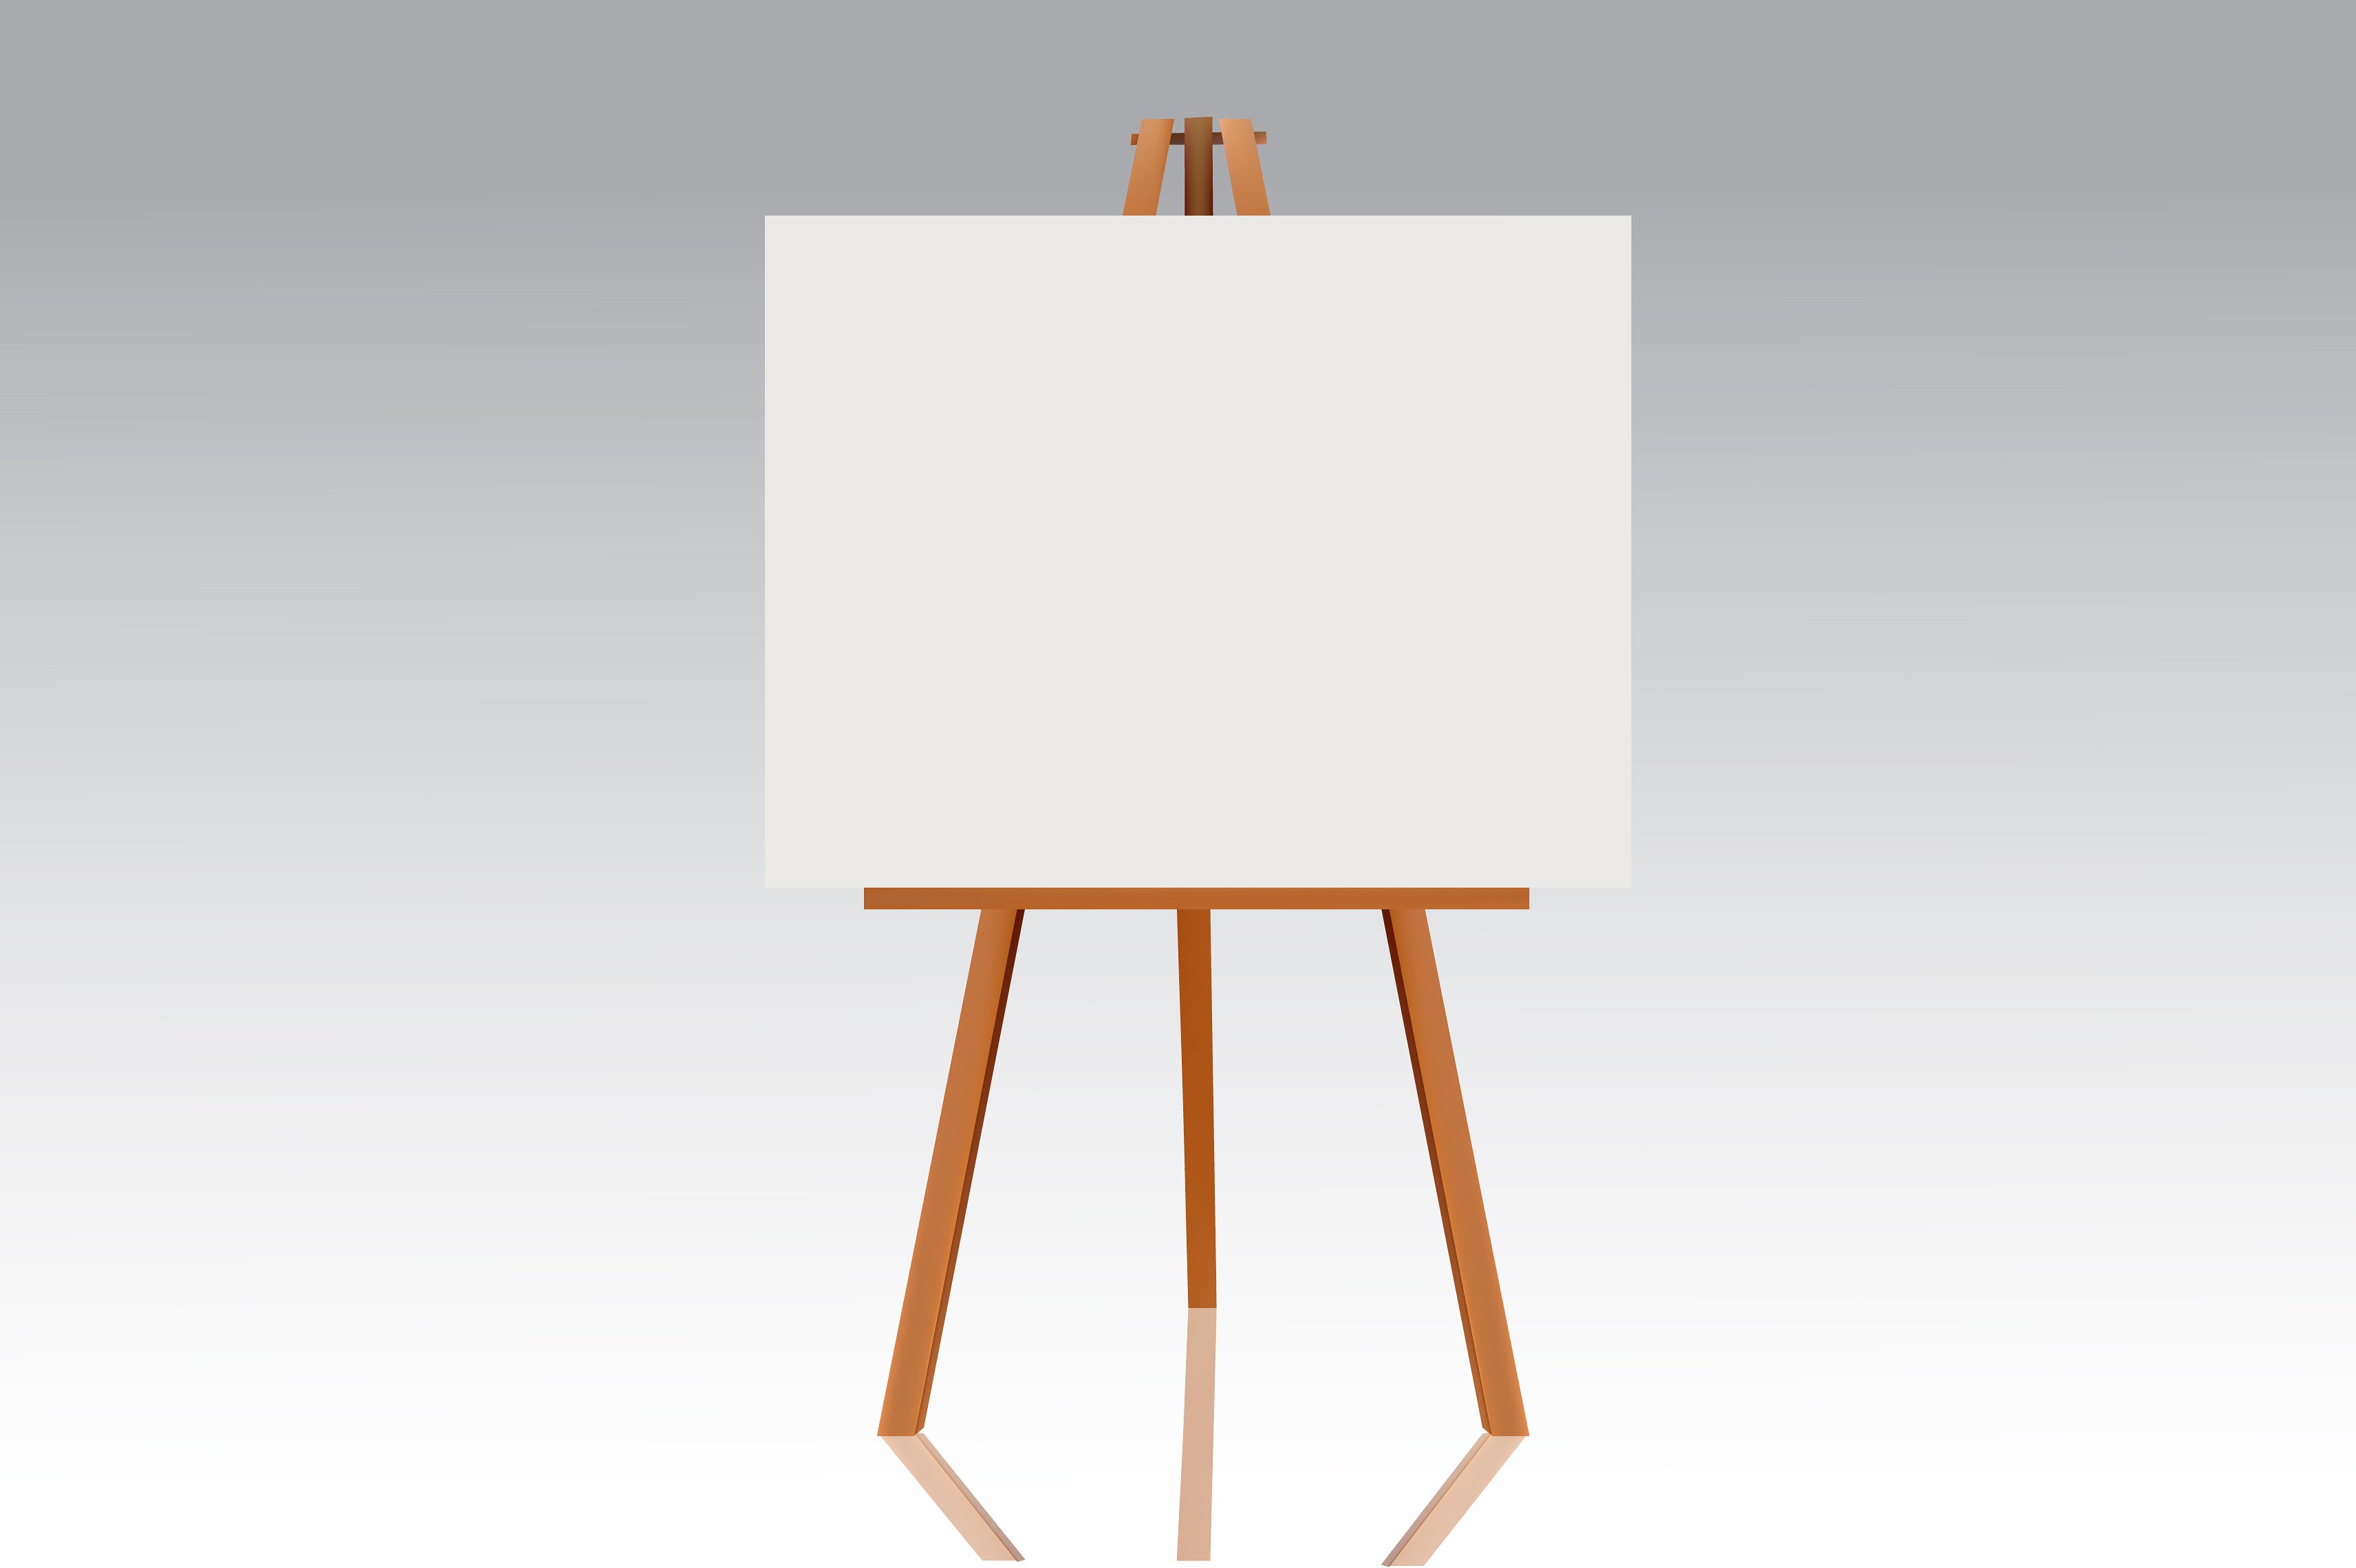 Wooden Easel Illustration ~ Objects ~ Creative Market